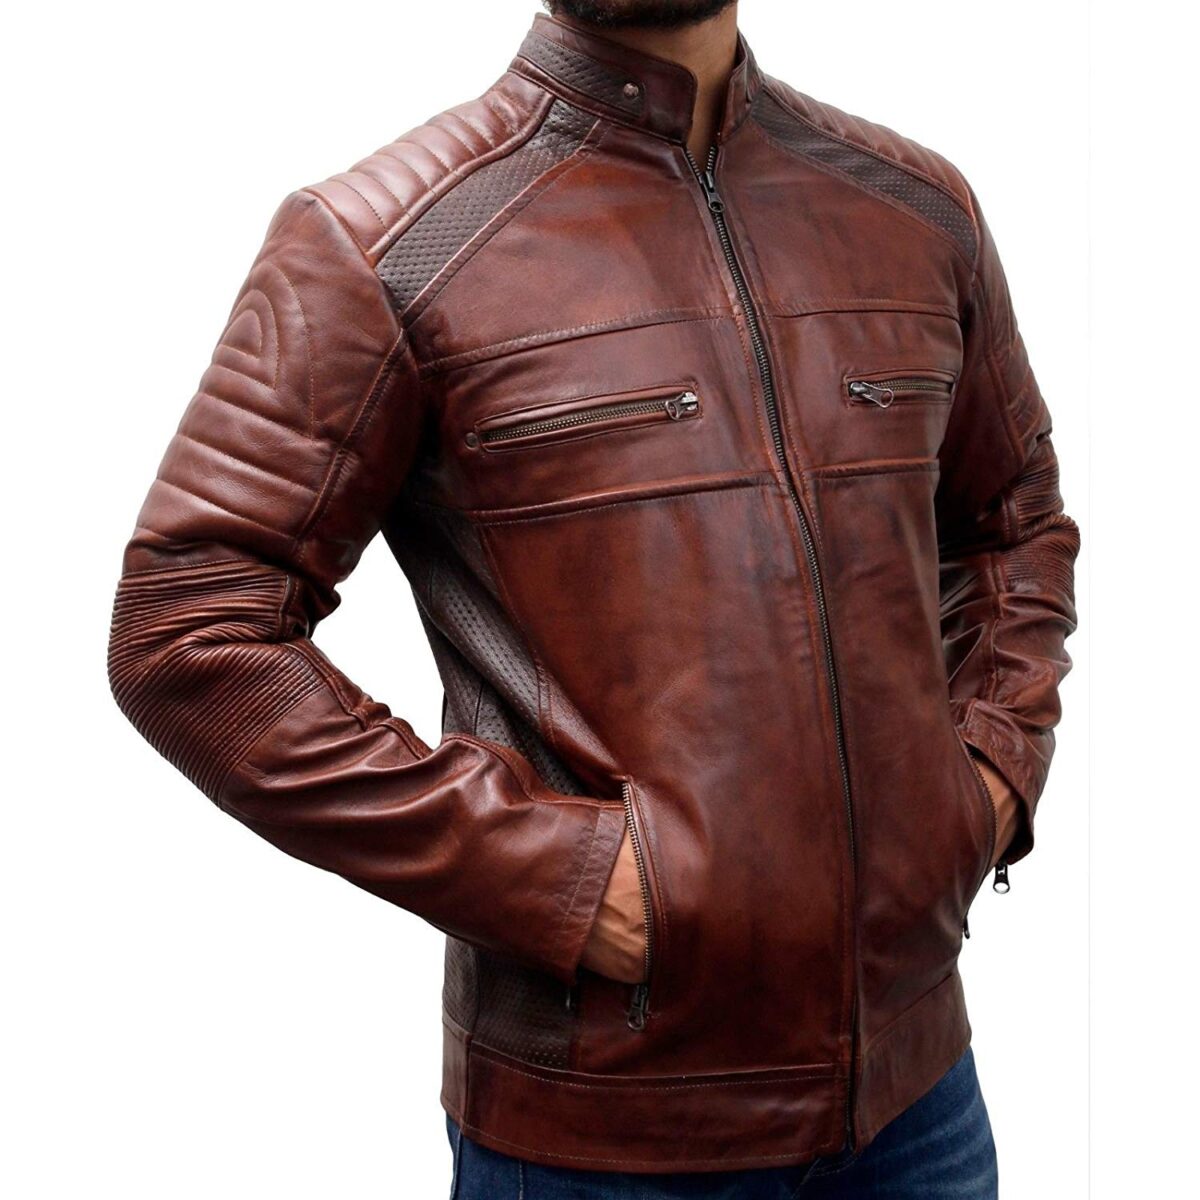 Real Leather Bane Coat - The Dark Knight Rises - Leather 4 Ever